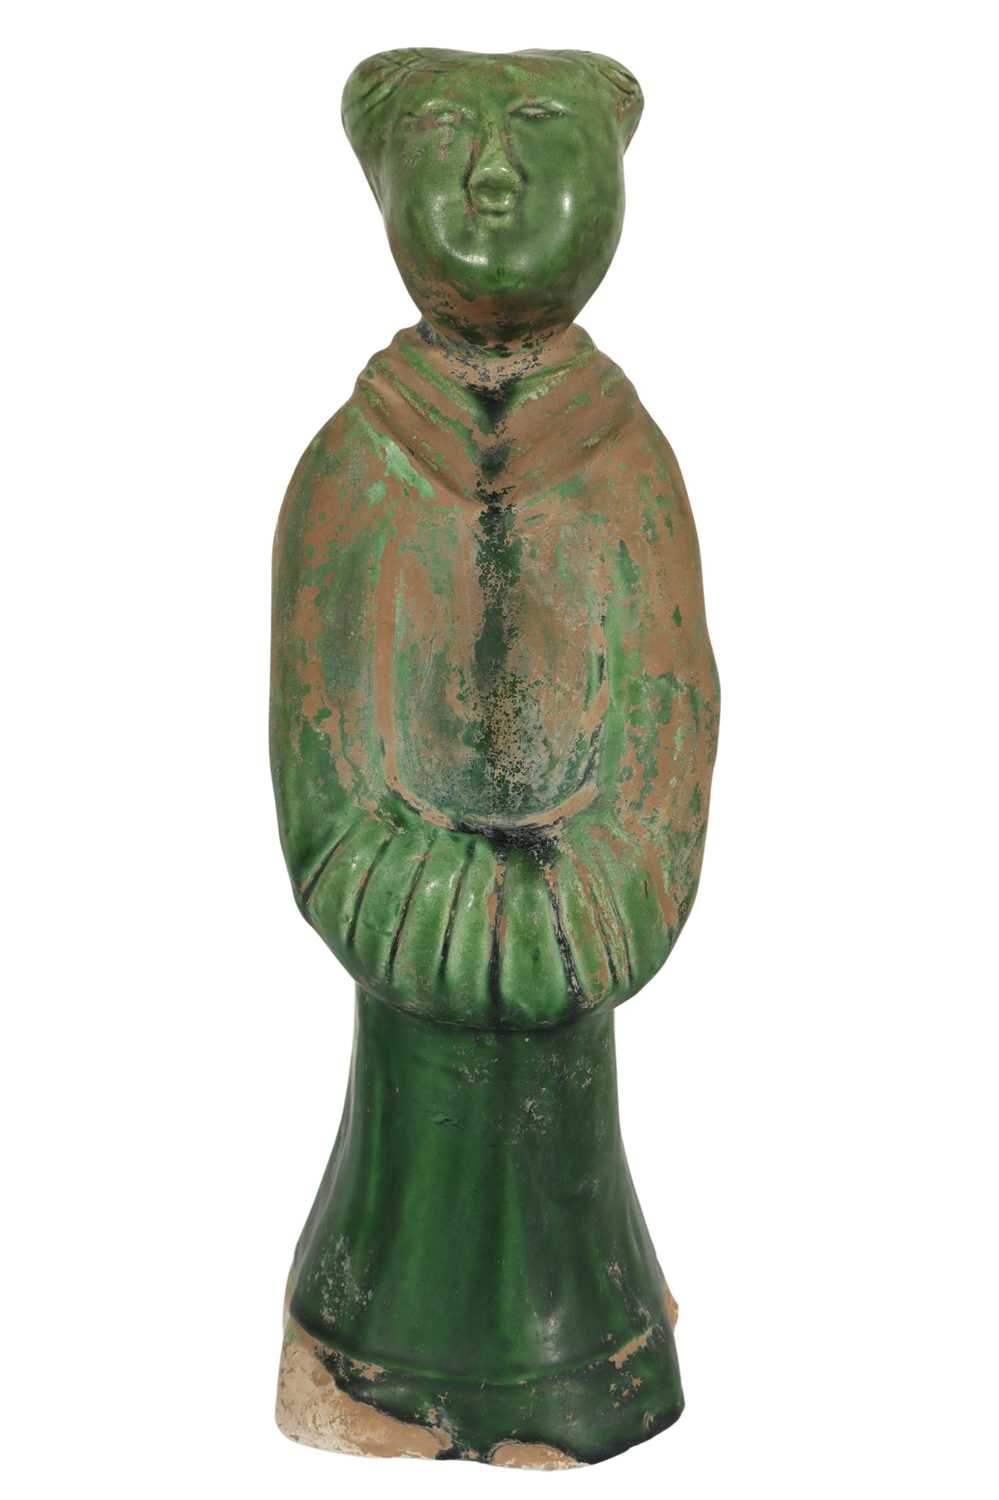 Lot 39 - CHINESE TOMB FIGURE